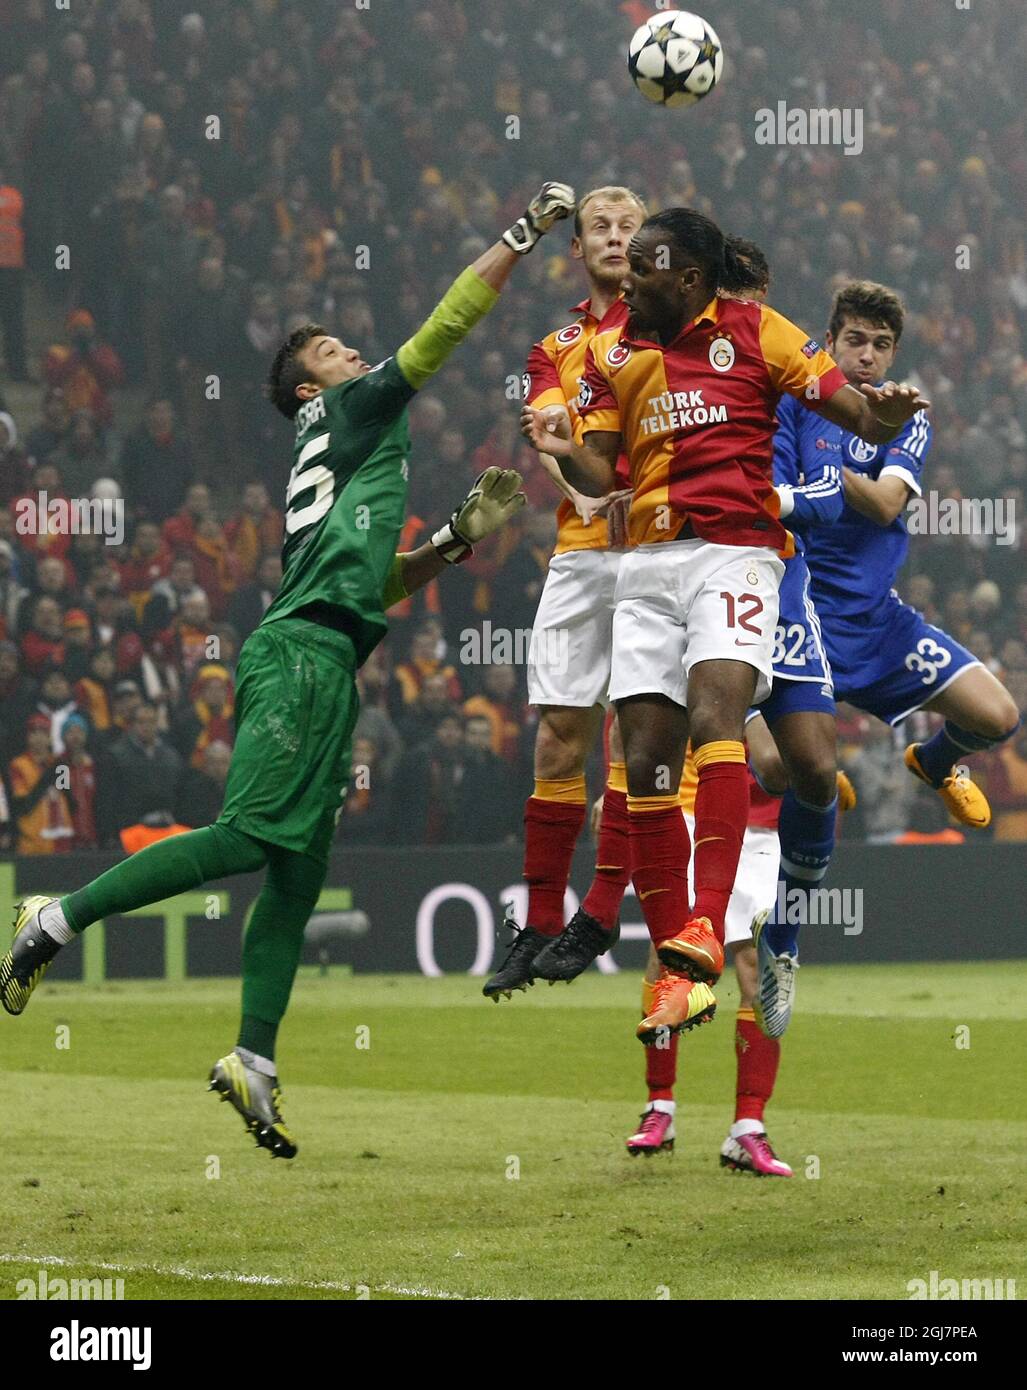 Galatasaray's Didier Drogba (centre) during their UEFA Champions League Round of 16 First Leg match Galatasaray between Schalke 04 at the TT Arena Ali Sami Yen Spor Kompleksi in Istanbul, Turkey on Wednesday 20 February 2013. Stock Photo